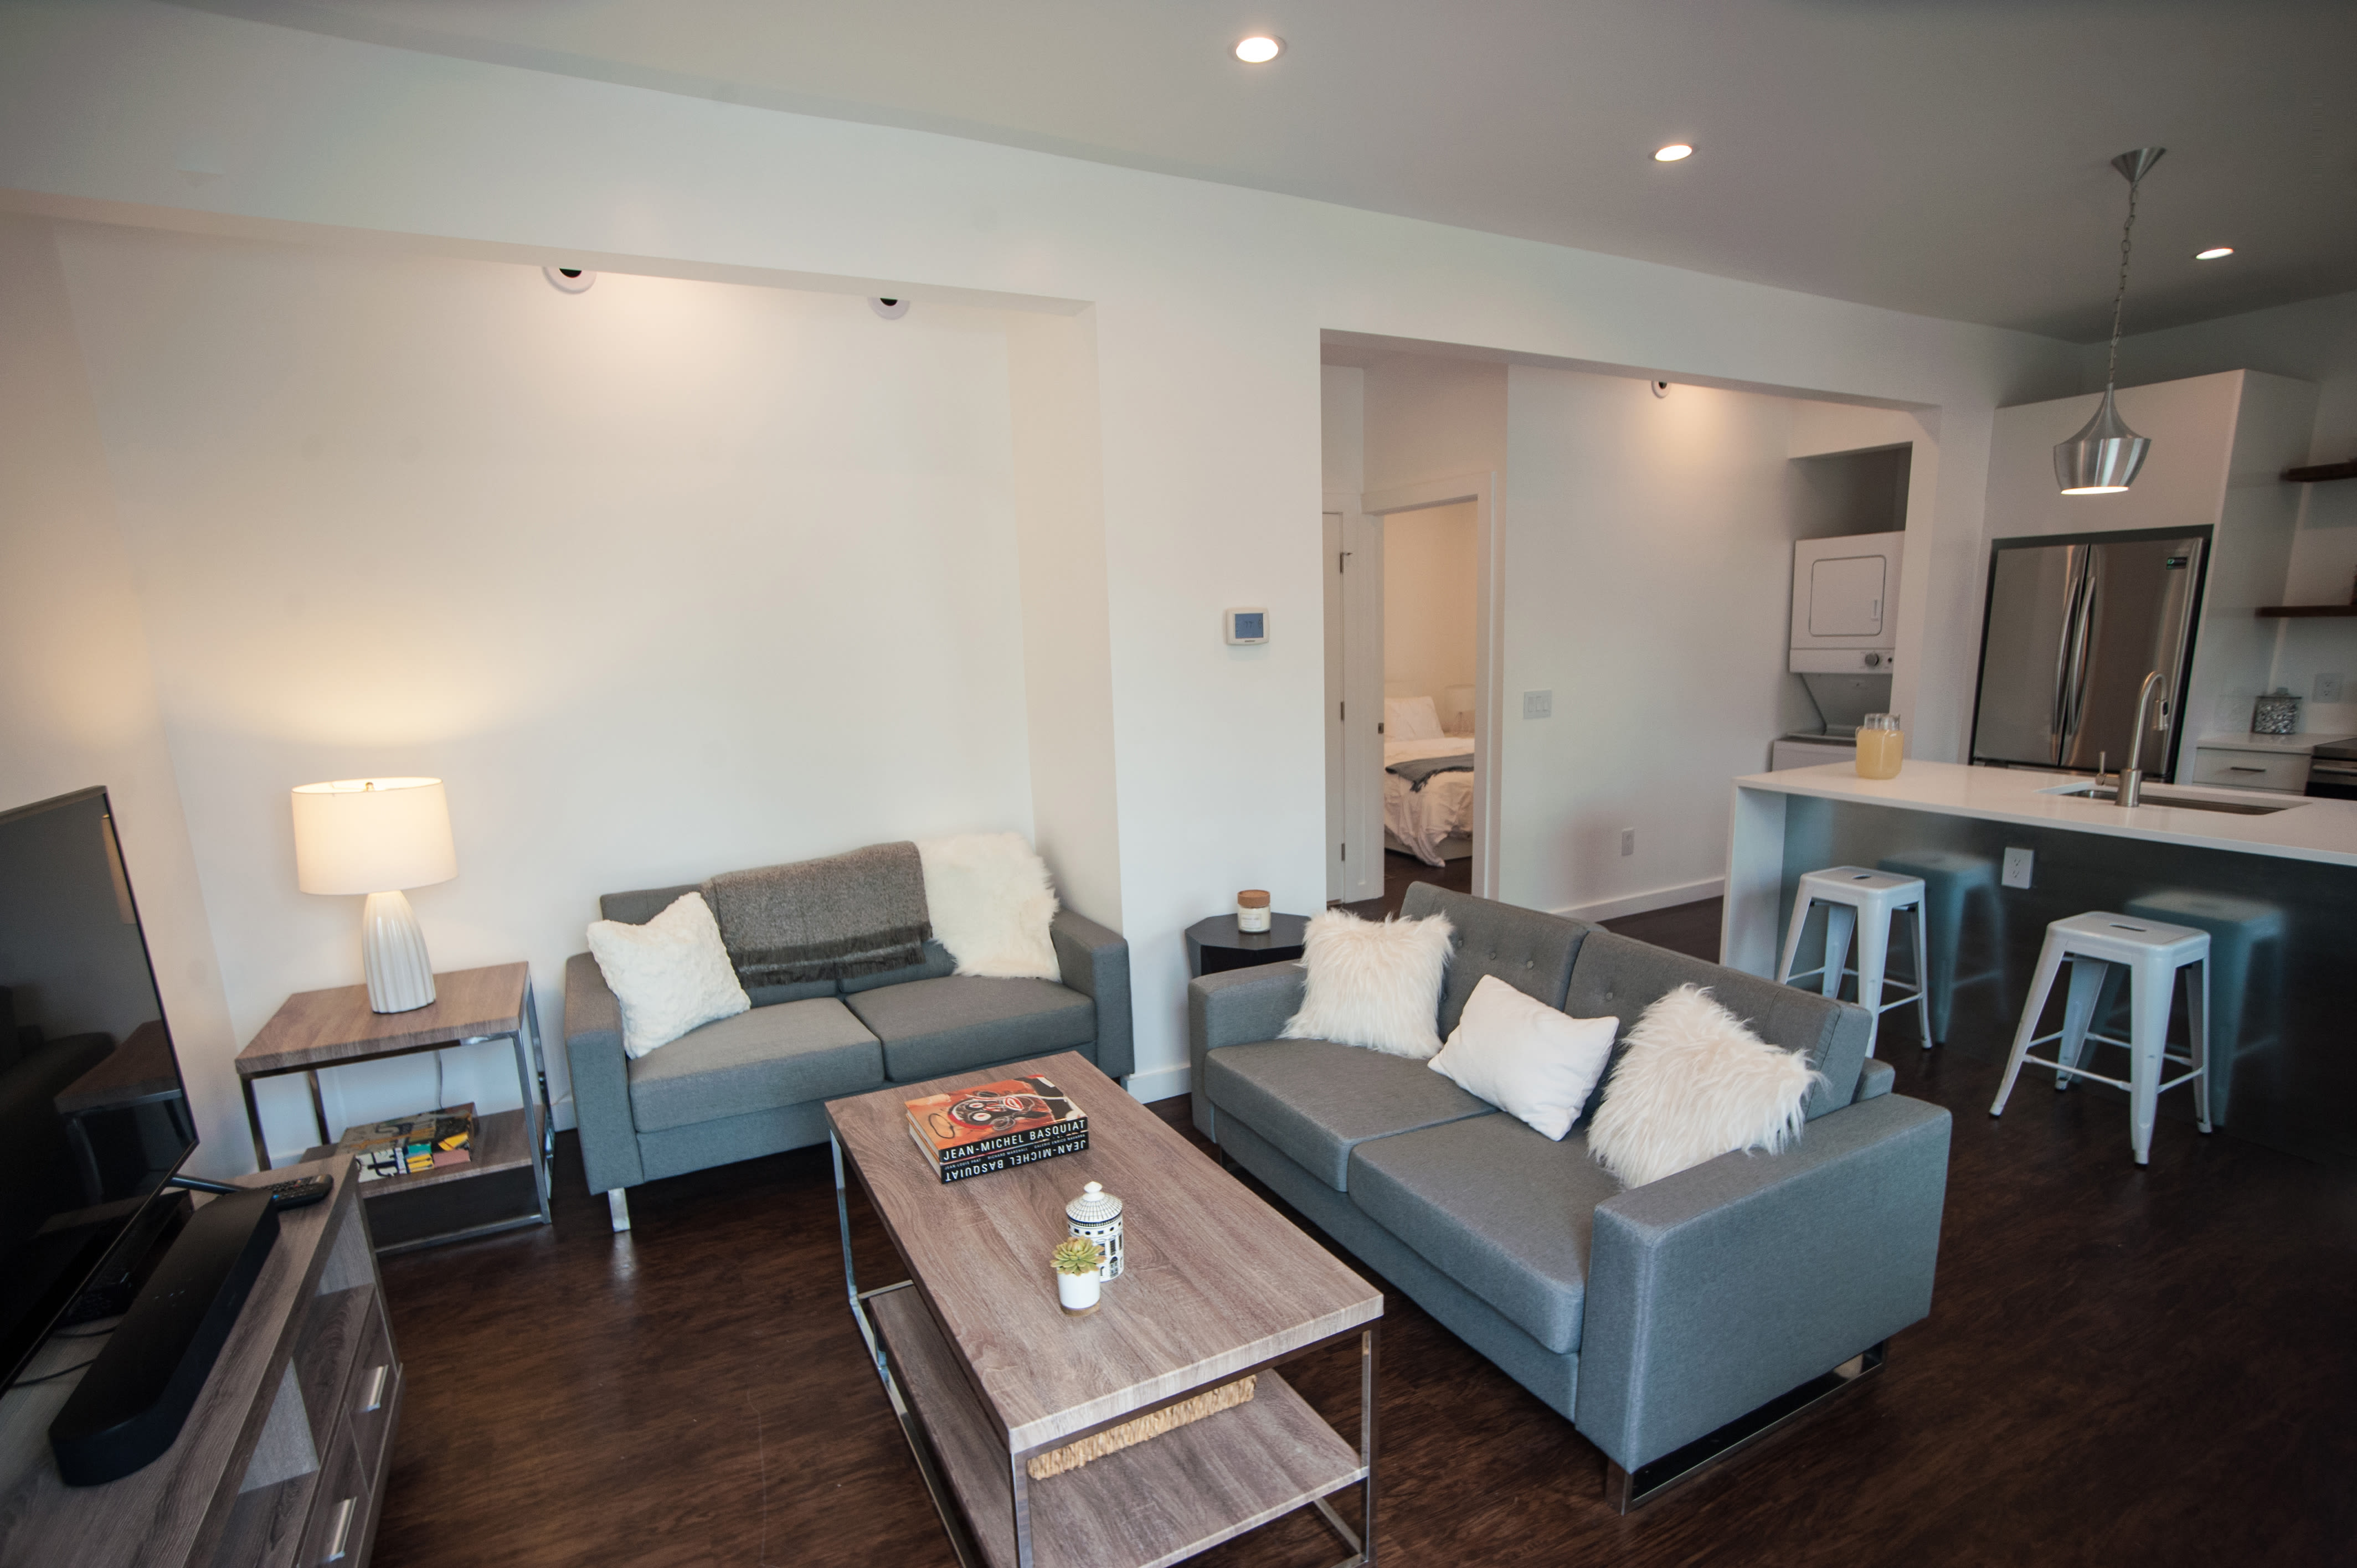 Fully furnished and living room in the student apartments at Campus Prime in Syracuse, New York